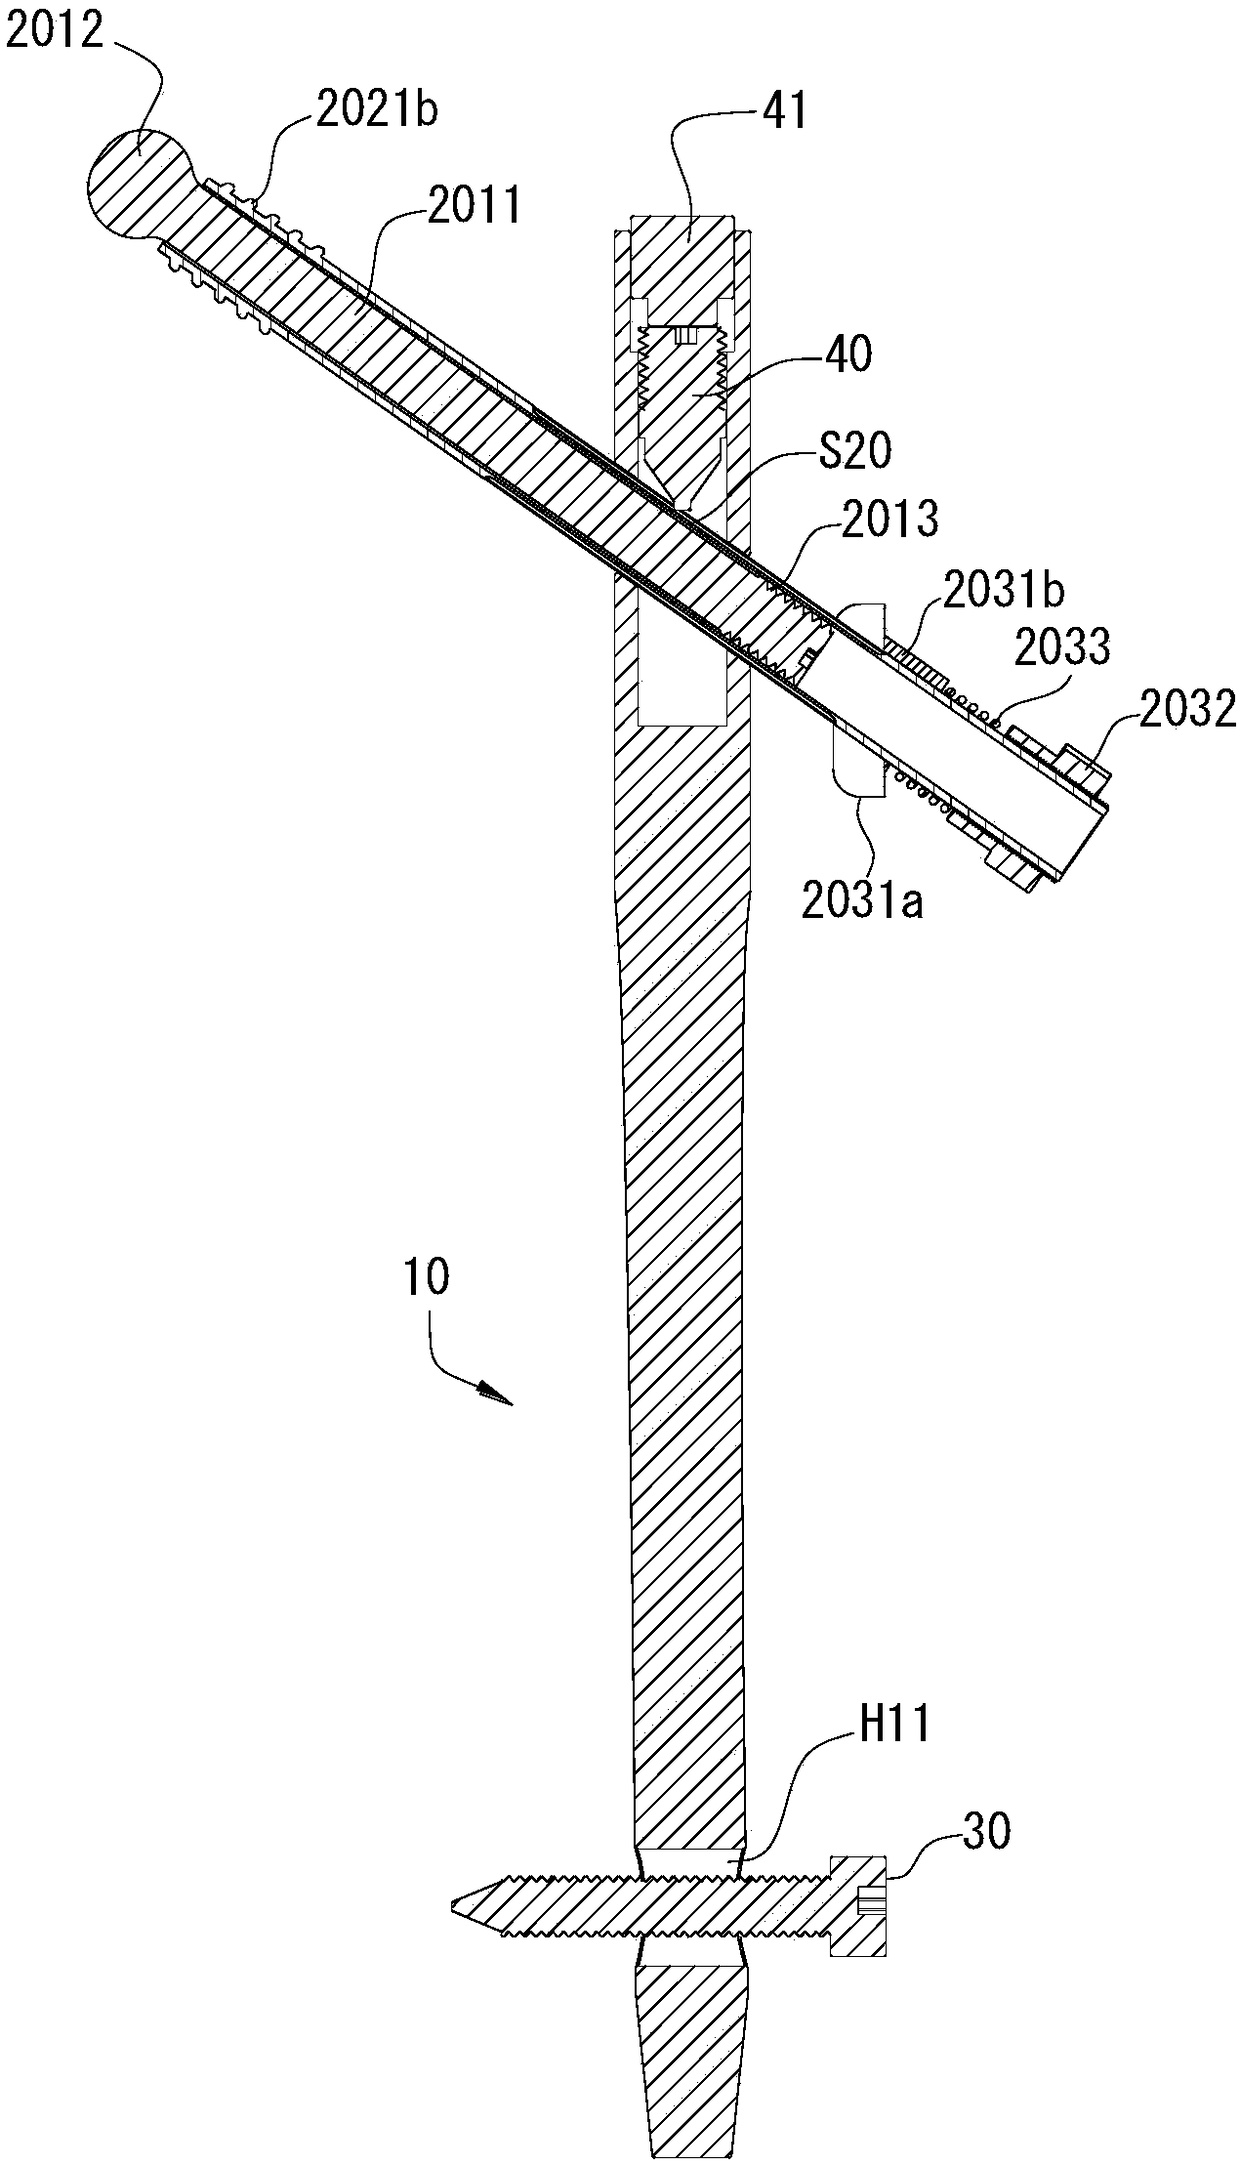 Internal fixation device for femoral intertrochanteric fracture